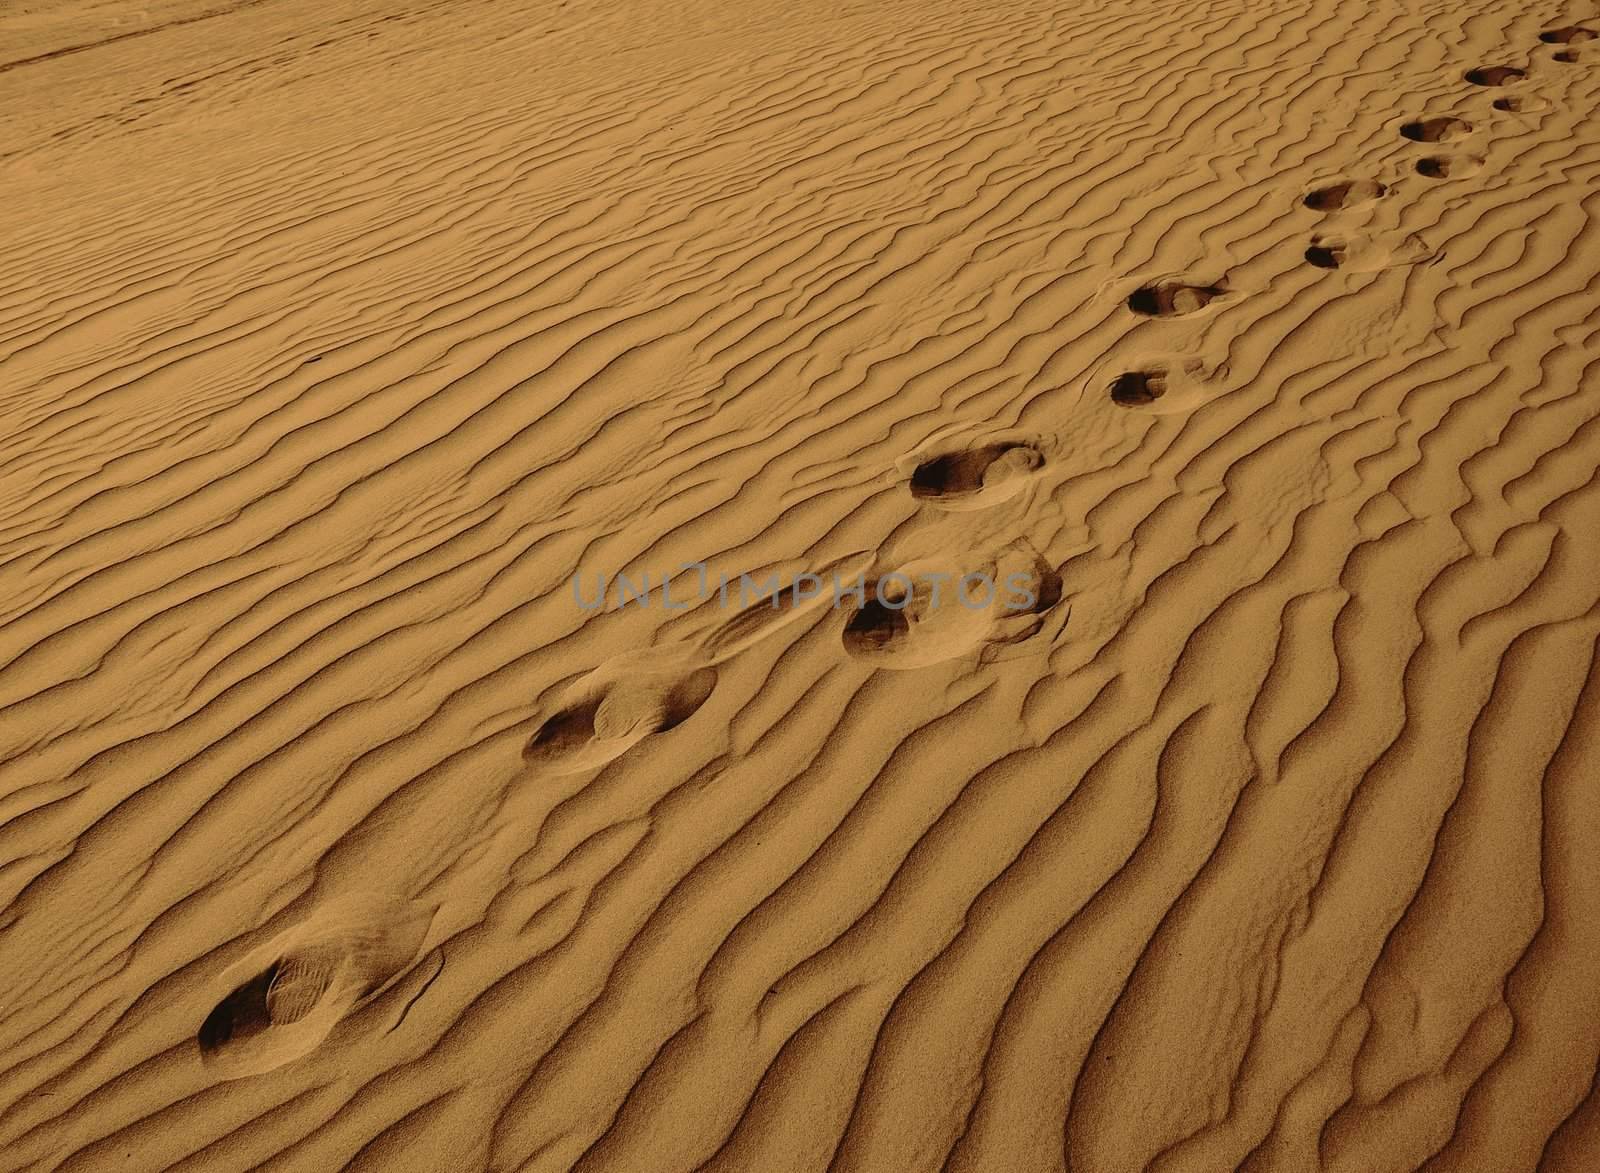 Horizontal Footprints in the Sand by pixelsnap